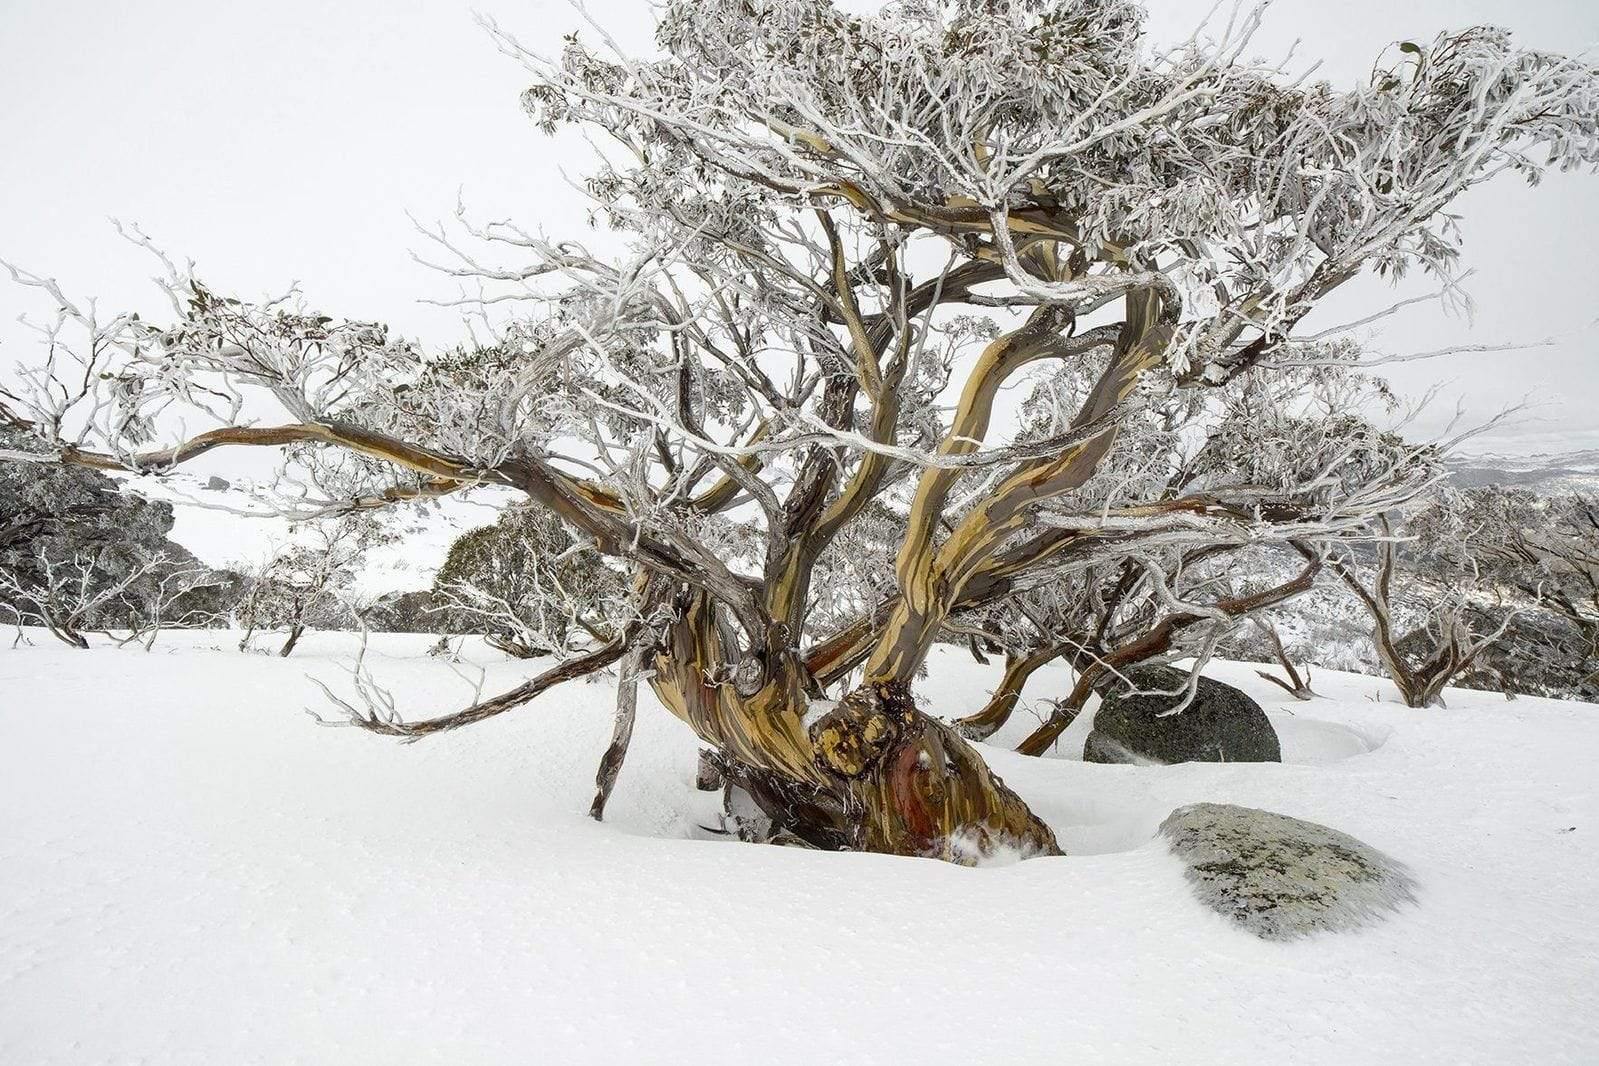 A messy gum tree covered with snow, Snowy Landscape - Snowy Mountains NSW